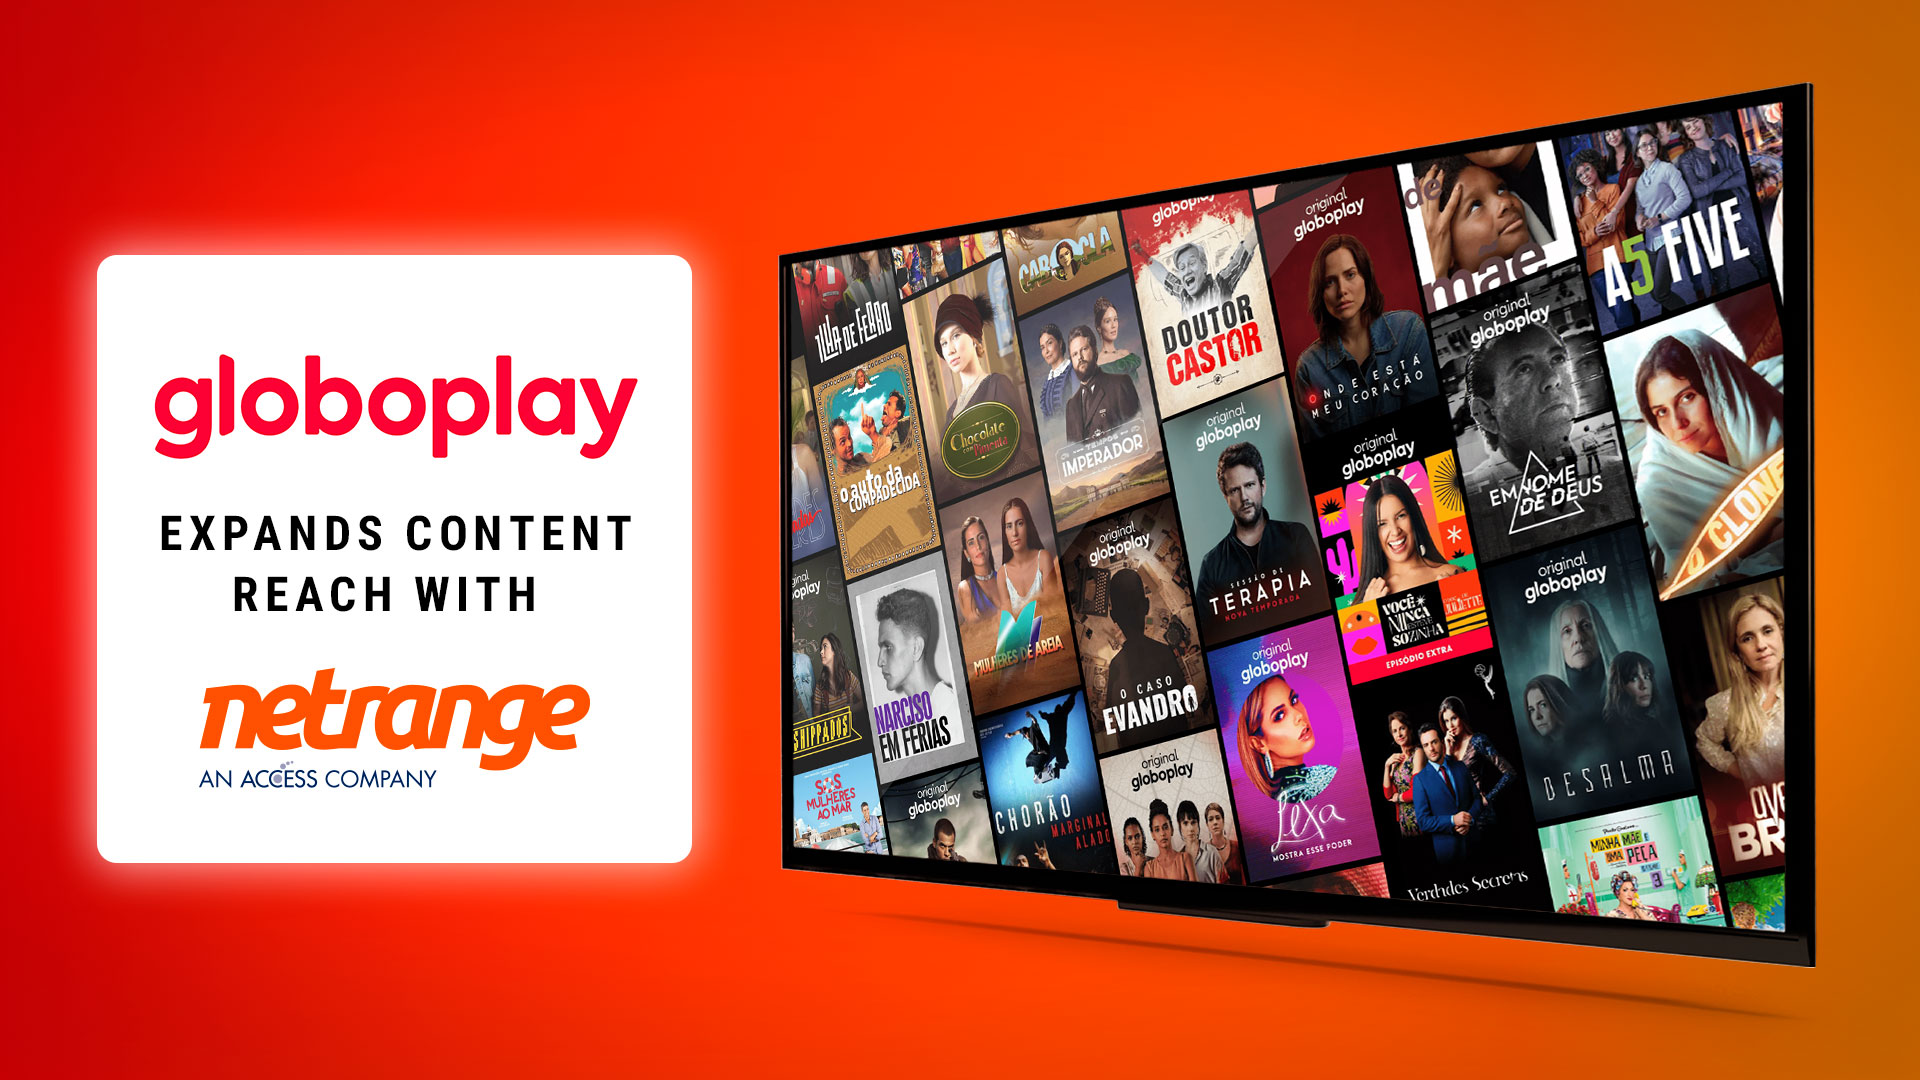 NetRange Portal gains upgraded Globoplay App to expand content reach to all connected devices throughout Brazil